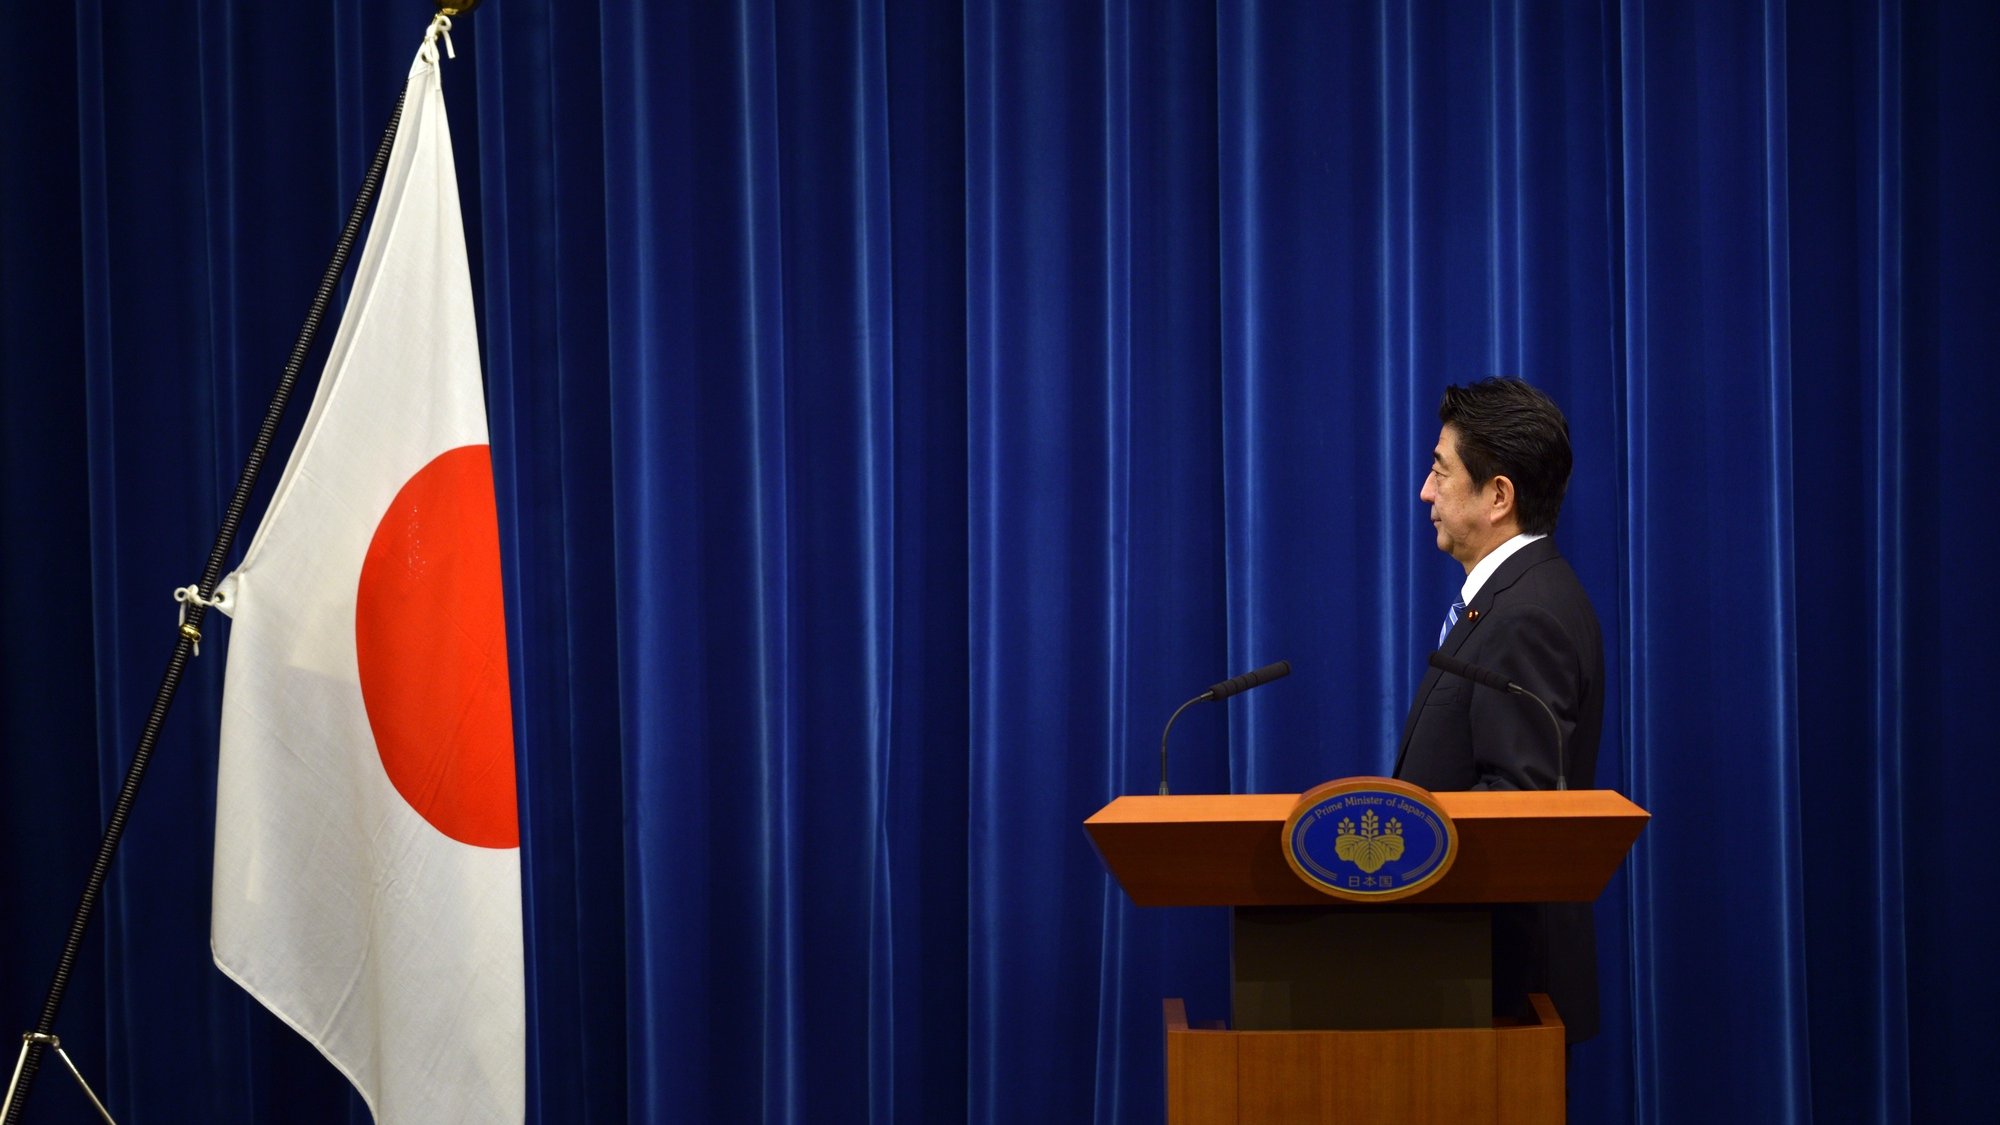 epa10058761 (FILE) - Japanese Prime Minister Shinzo Abe poses facing towards the national flag at the Prime Minister&#039;s official residence in Tokyo, Japan, 01 October 2013 (reissued 08 July 2022). According to Japan&#039;s national broadcaster, former Prime Minister Shinzo Abe died of his injuries on 08 July 2022, hours after being shot during an Upper House election campaign act to support a party candidate, outside a railway station in Nara, western Japan. He was 67. Abe had served as Japan&#039;s prime minister from 2006 to 2007 and again from 2012 to 2020. He was the longest-serving prime minister in the history of the country.  EPA/FRANCK ROBICHON *** Local Caption *** 56302707